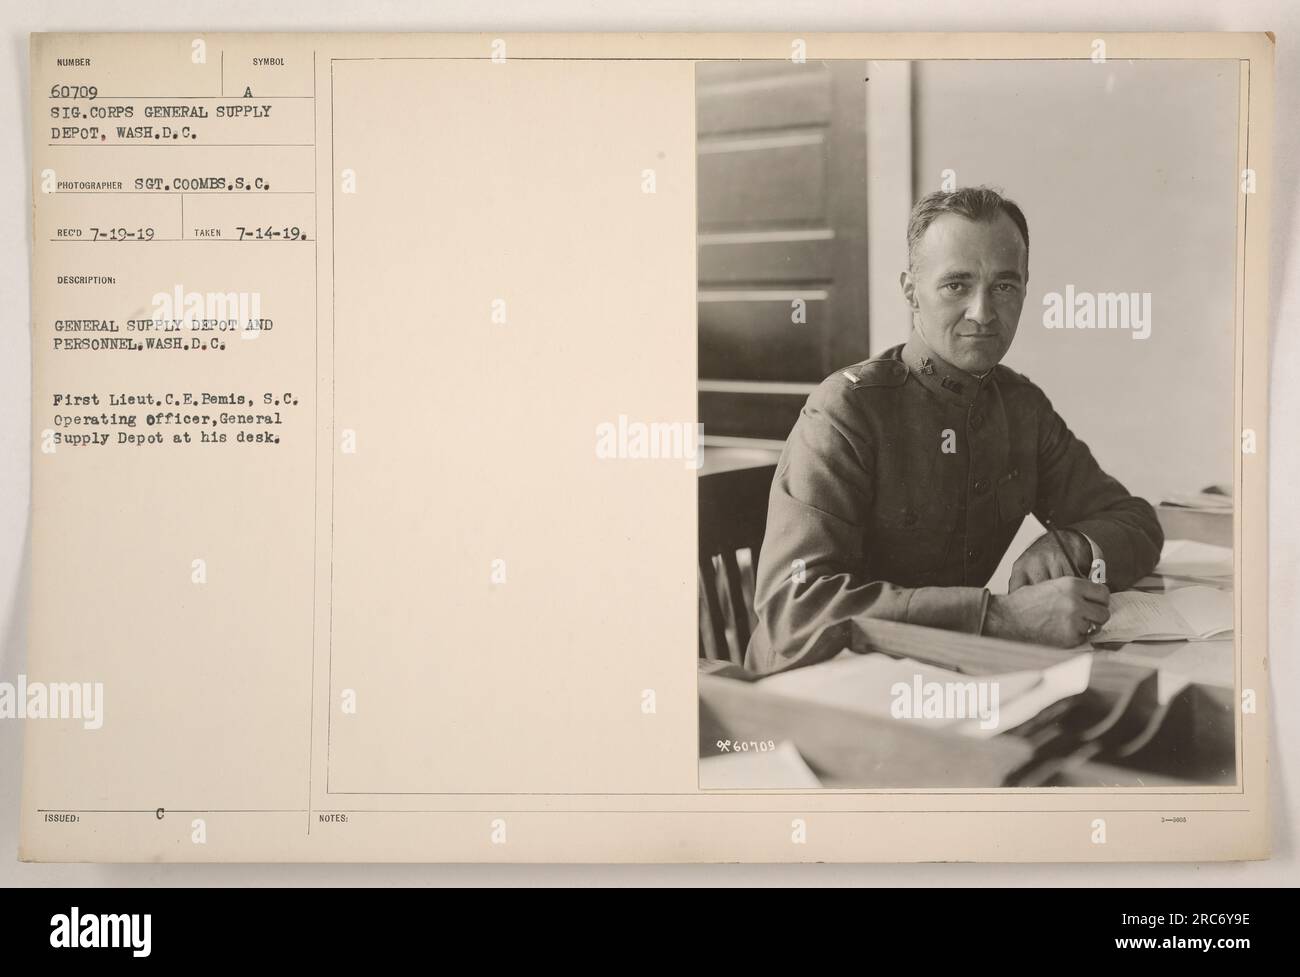 First Lieut. C.E. Bemis, S.C., the operating officer at the General Supply Depot in Washington D.C., is pictured sitting at his desk. This photograph was taken on July 14, 1919, by photographer Sot. Coombs. The image is part of a collection documenting American military activities during World War One. Stock Photo